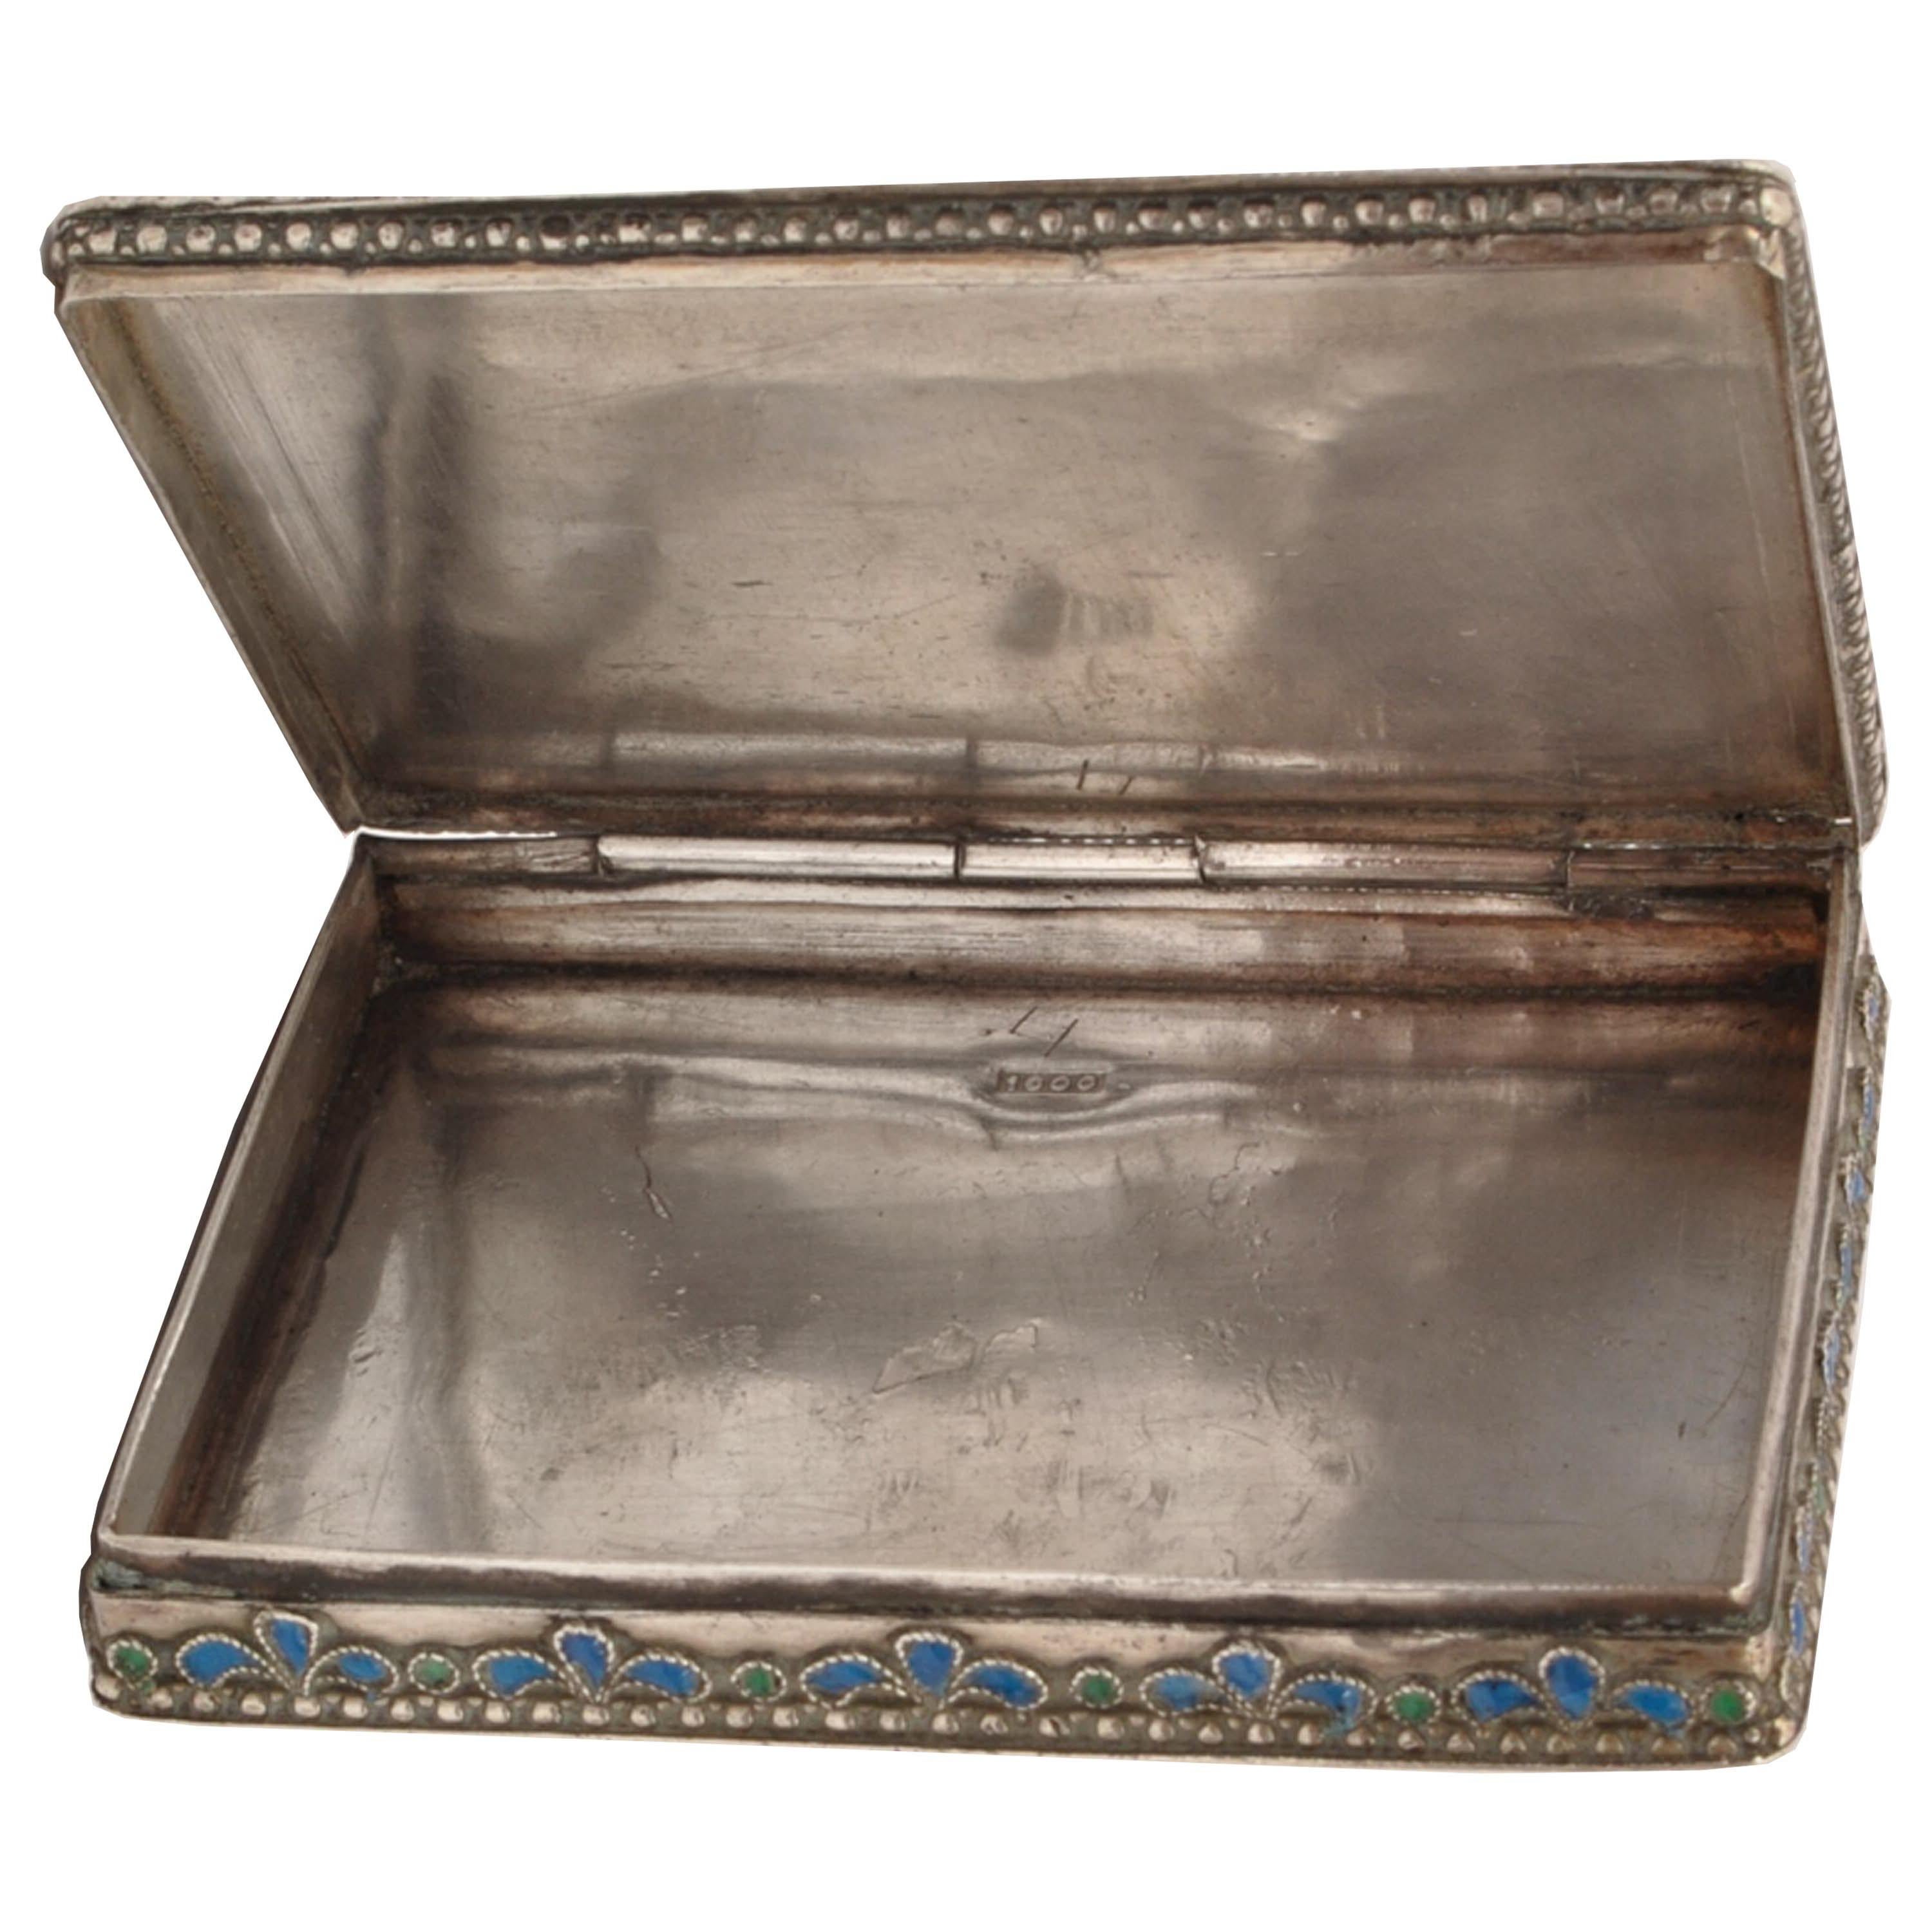 Antique Greek Civil War Pure Silver Cloisonne Case Engraved Athens Army Day 1946 In Good Condition For Sale In Portland, OR